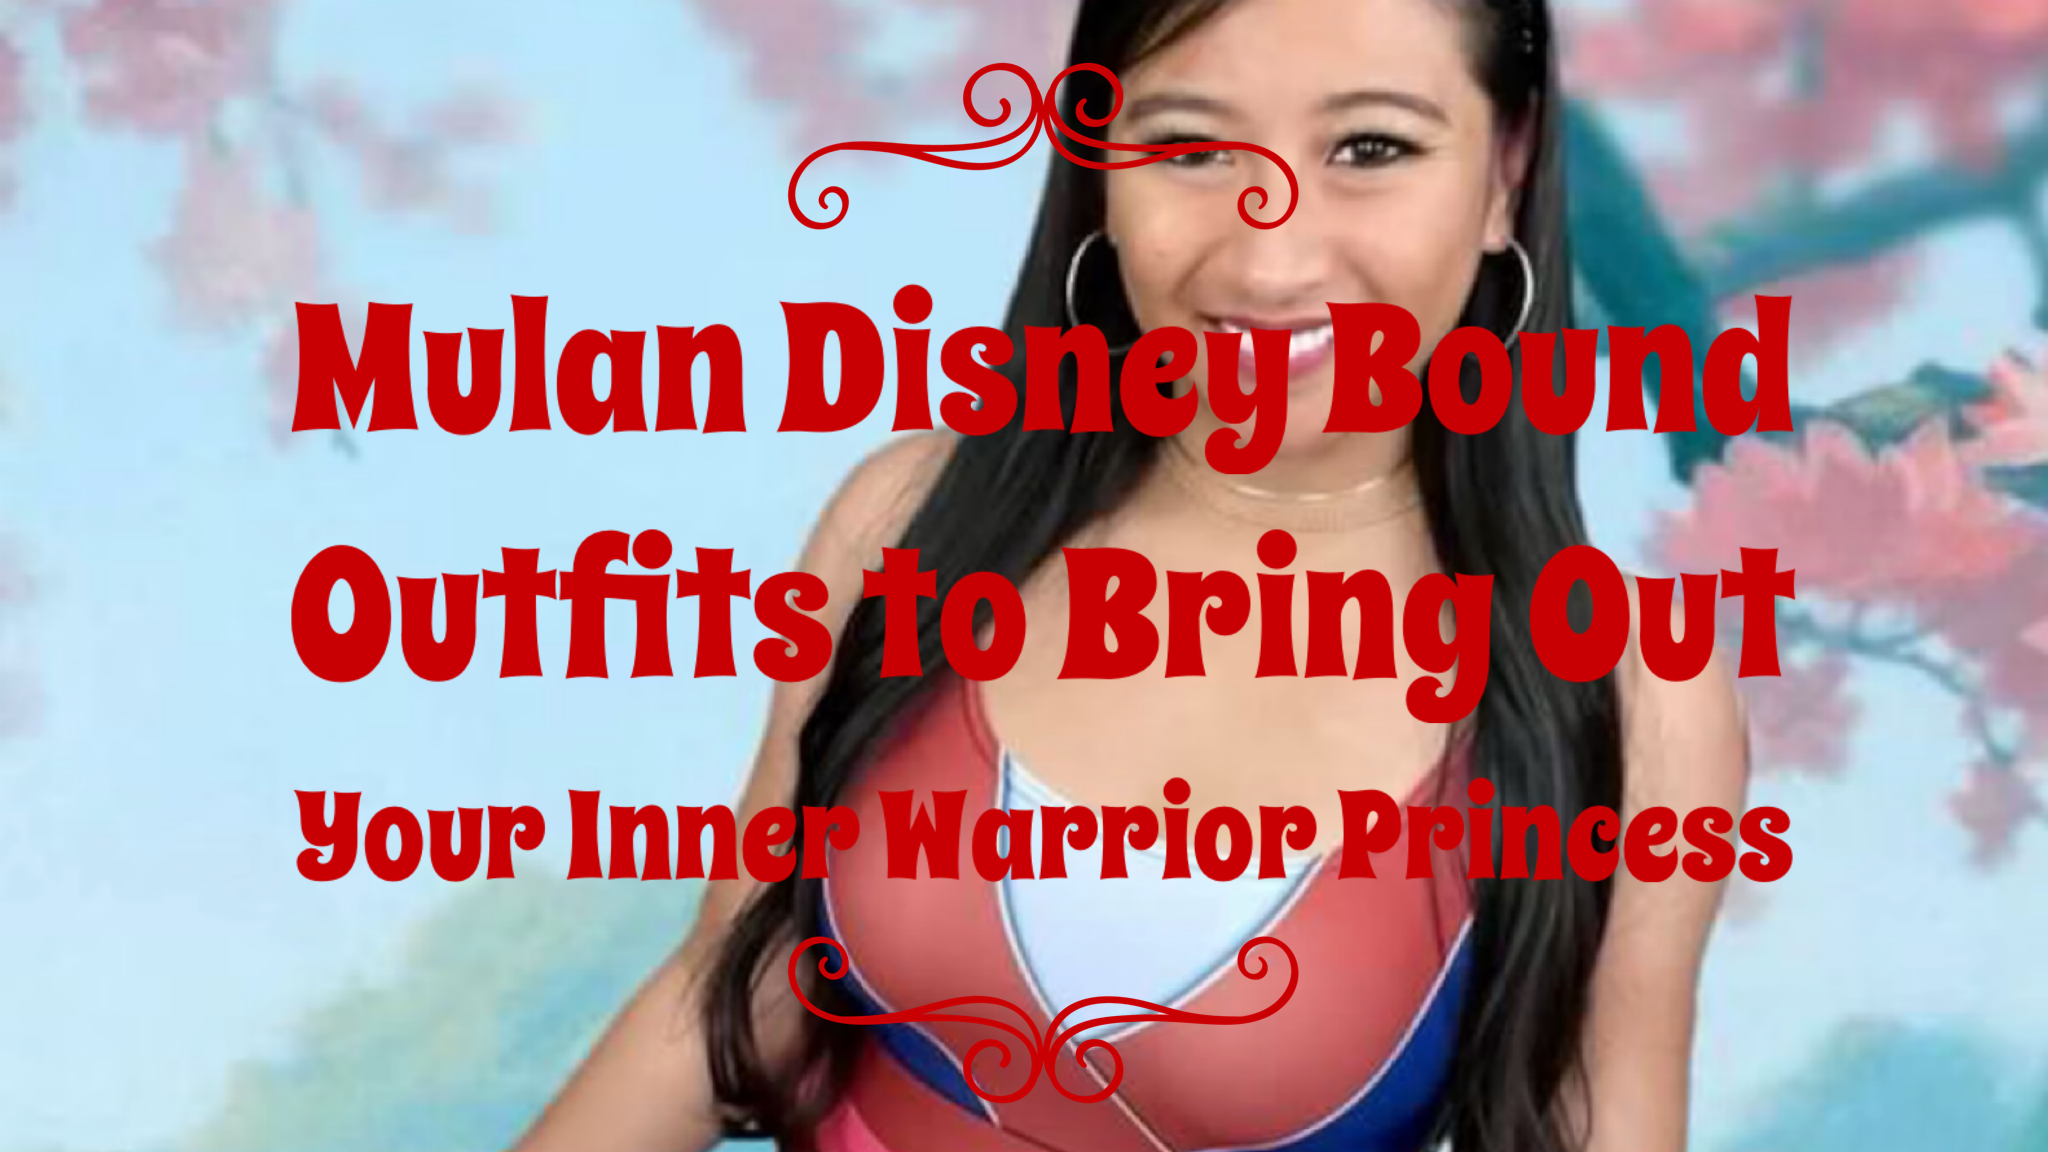 Mulan Disney Bound Outfits to Bring Out Your Inner Warrior Princess